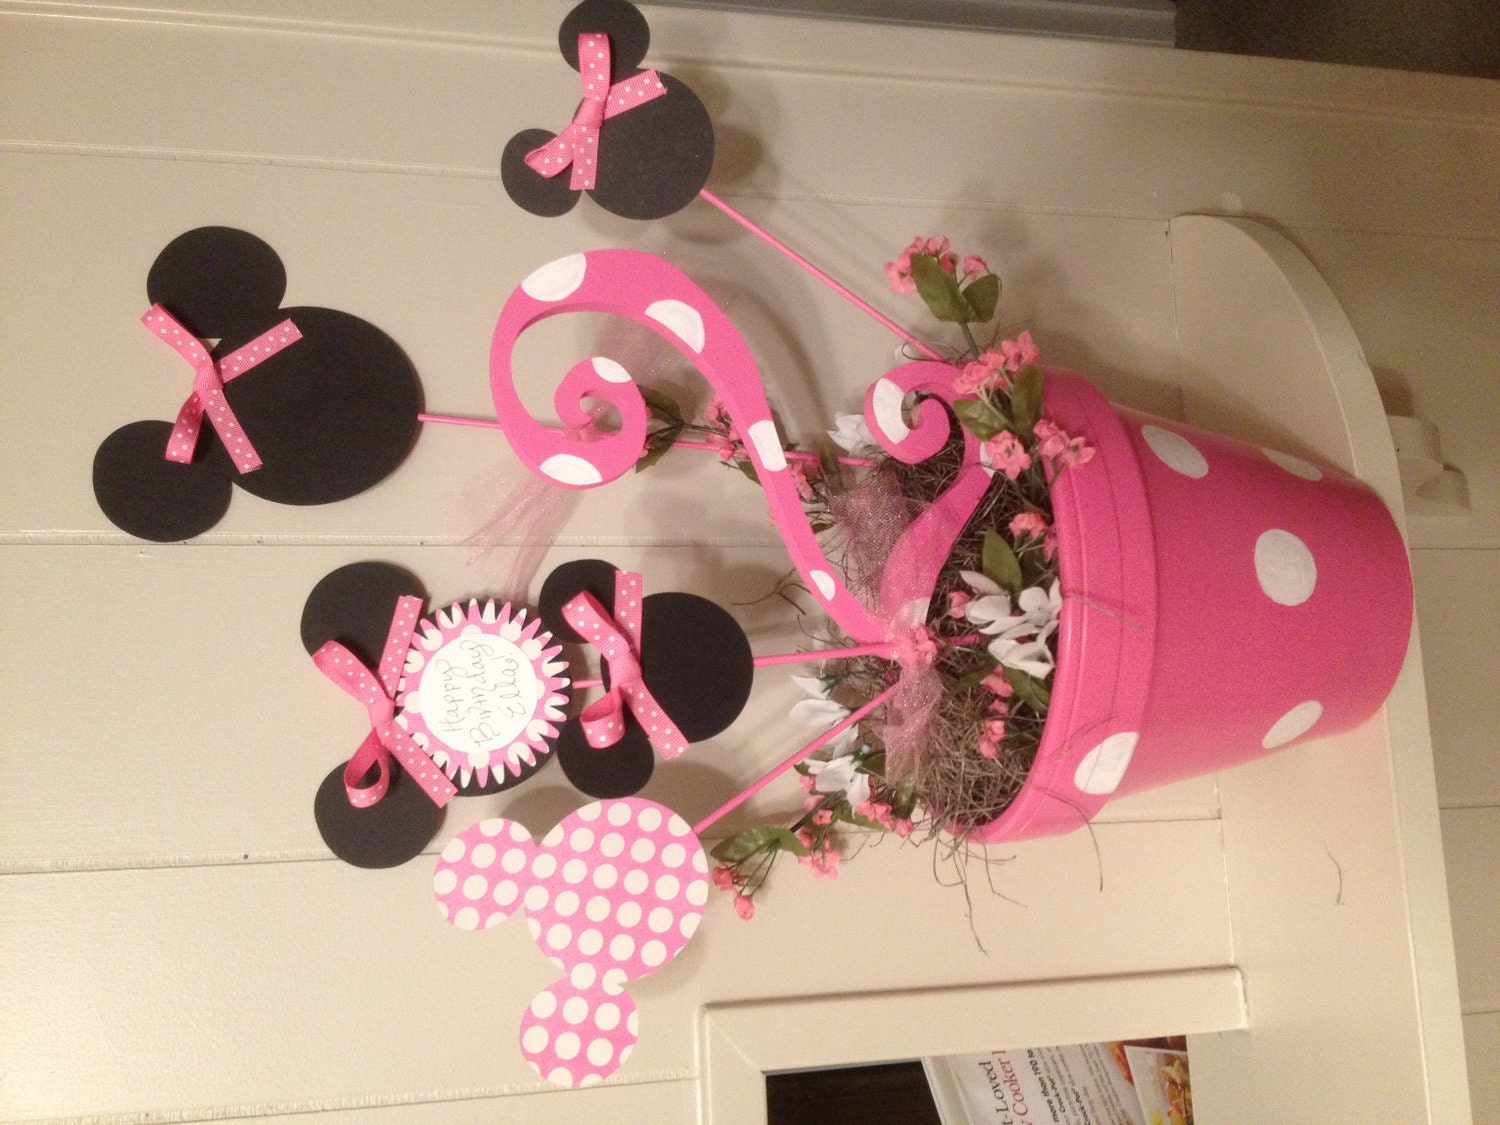 minnie mouse table